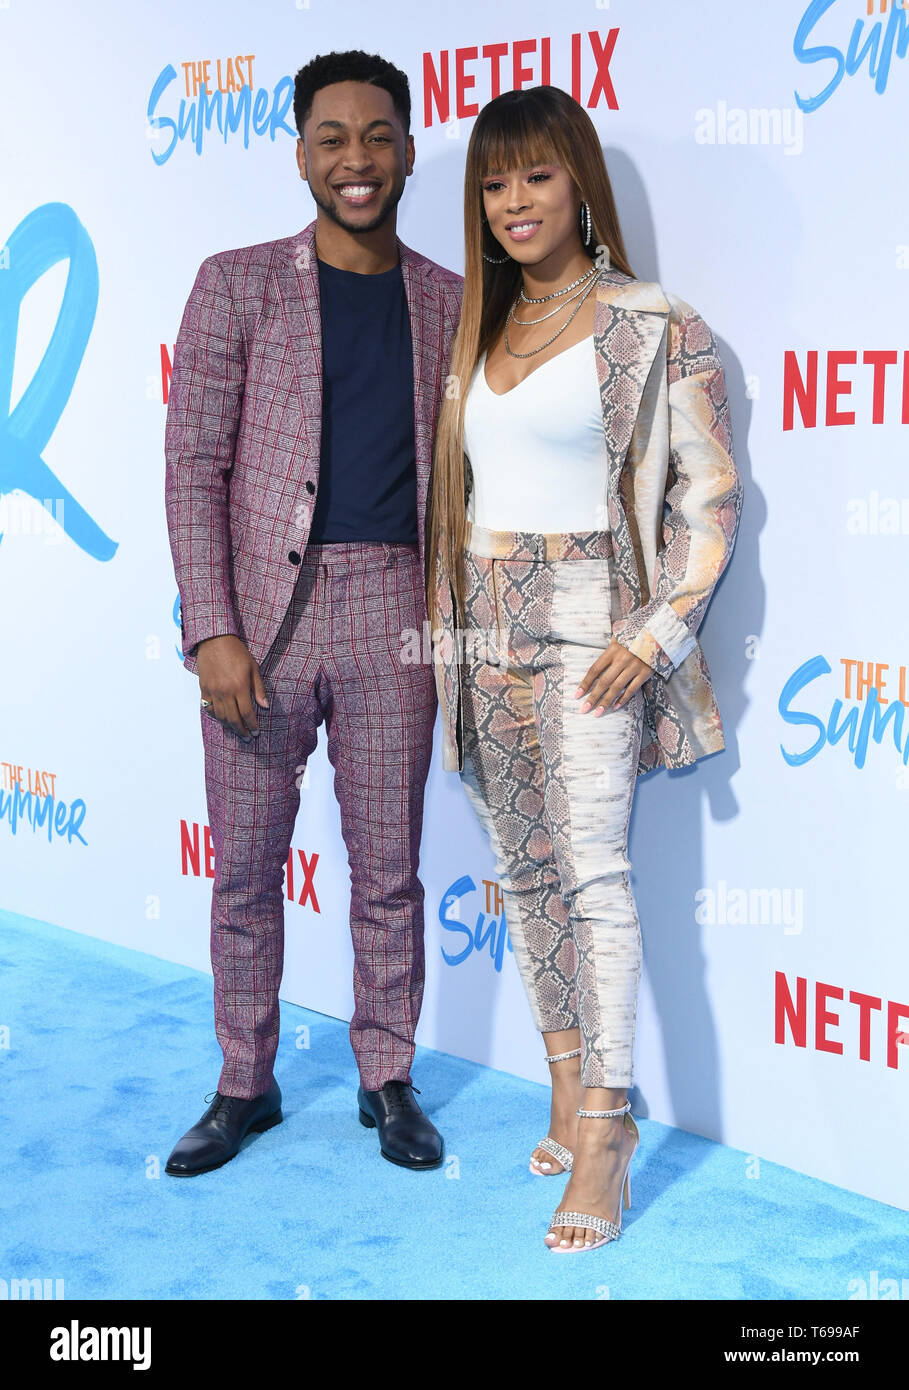 April 29, 2019 - Hollywood, California, U.S. - 29 April 2019 - Hollywood, California - Jacob Latimore, Serayah. Netflix's ''The Last Summer'' Los Angeles Special Screening held at TCL Chinese 6 Theatre. Photo Credit: Birdie Thompson/AdMedia (Credit Image: © Birdie Thompson/AdMedia via ZUMA Wire) Stock Photo